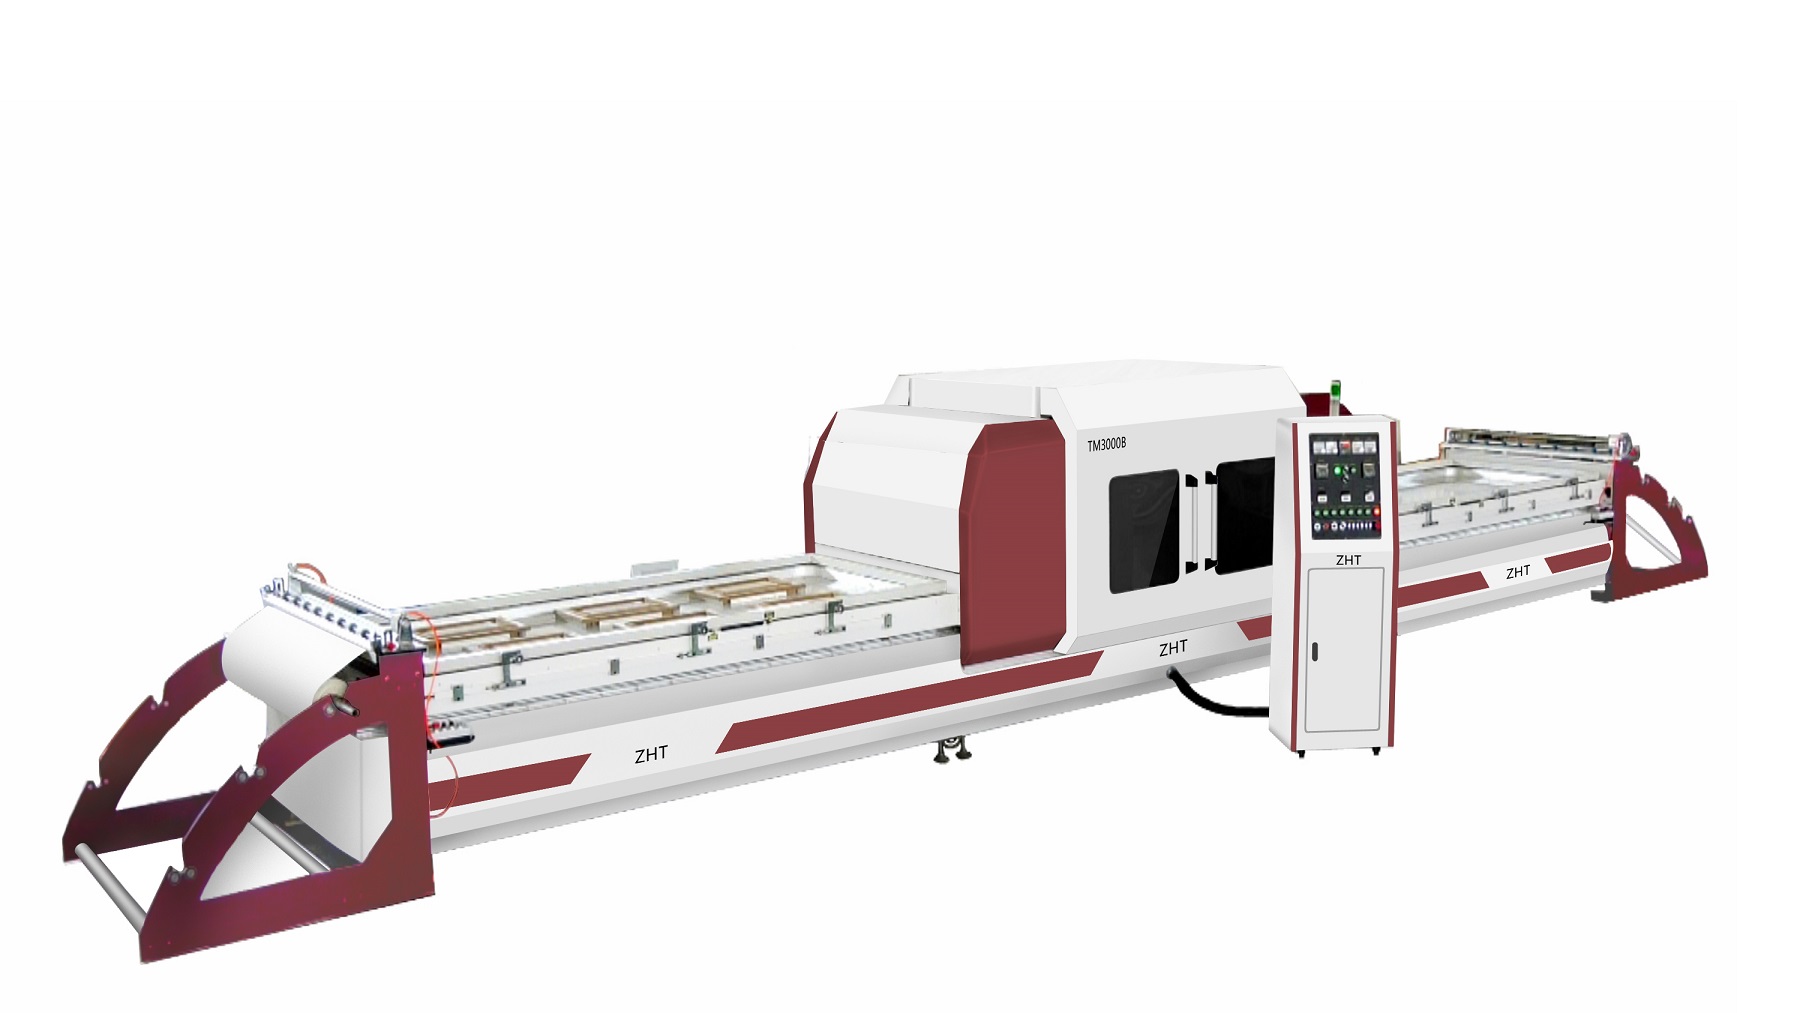 TM3000B High-Performance Membrane Press Machine: Optimal Efficiency, Comfortable Operation, And Superior High-Gloss PVC Results